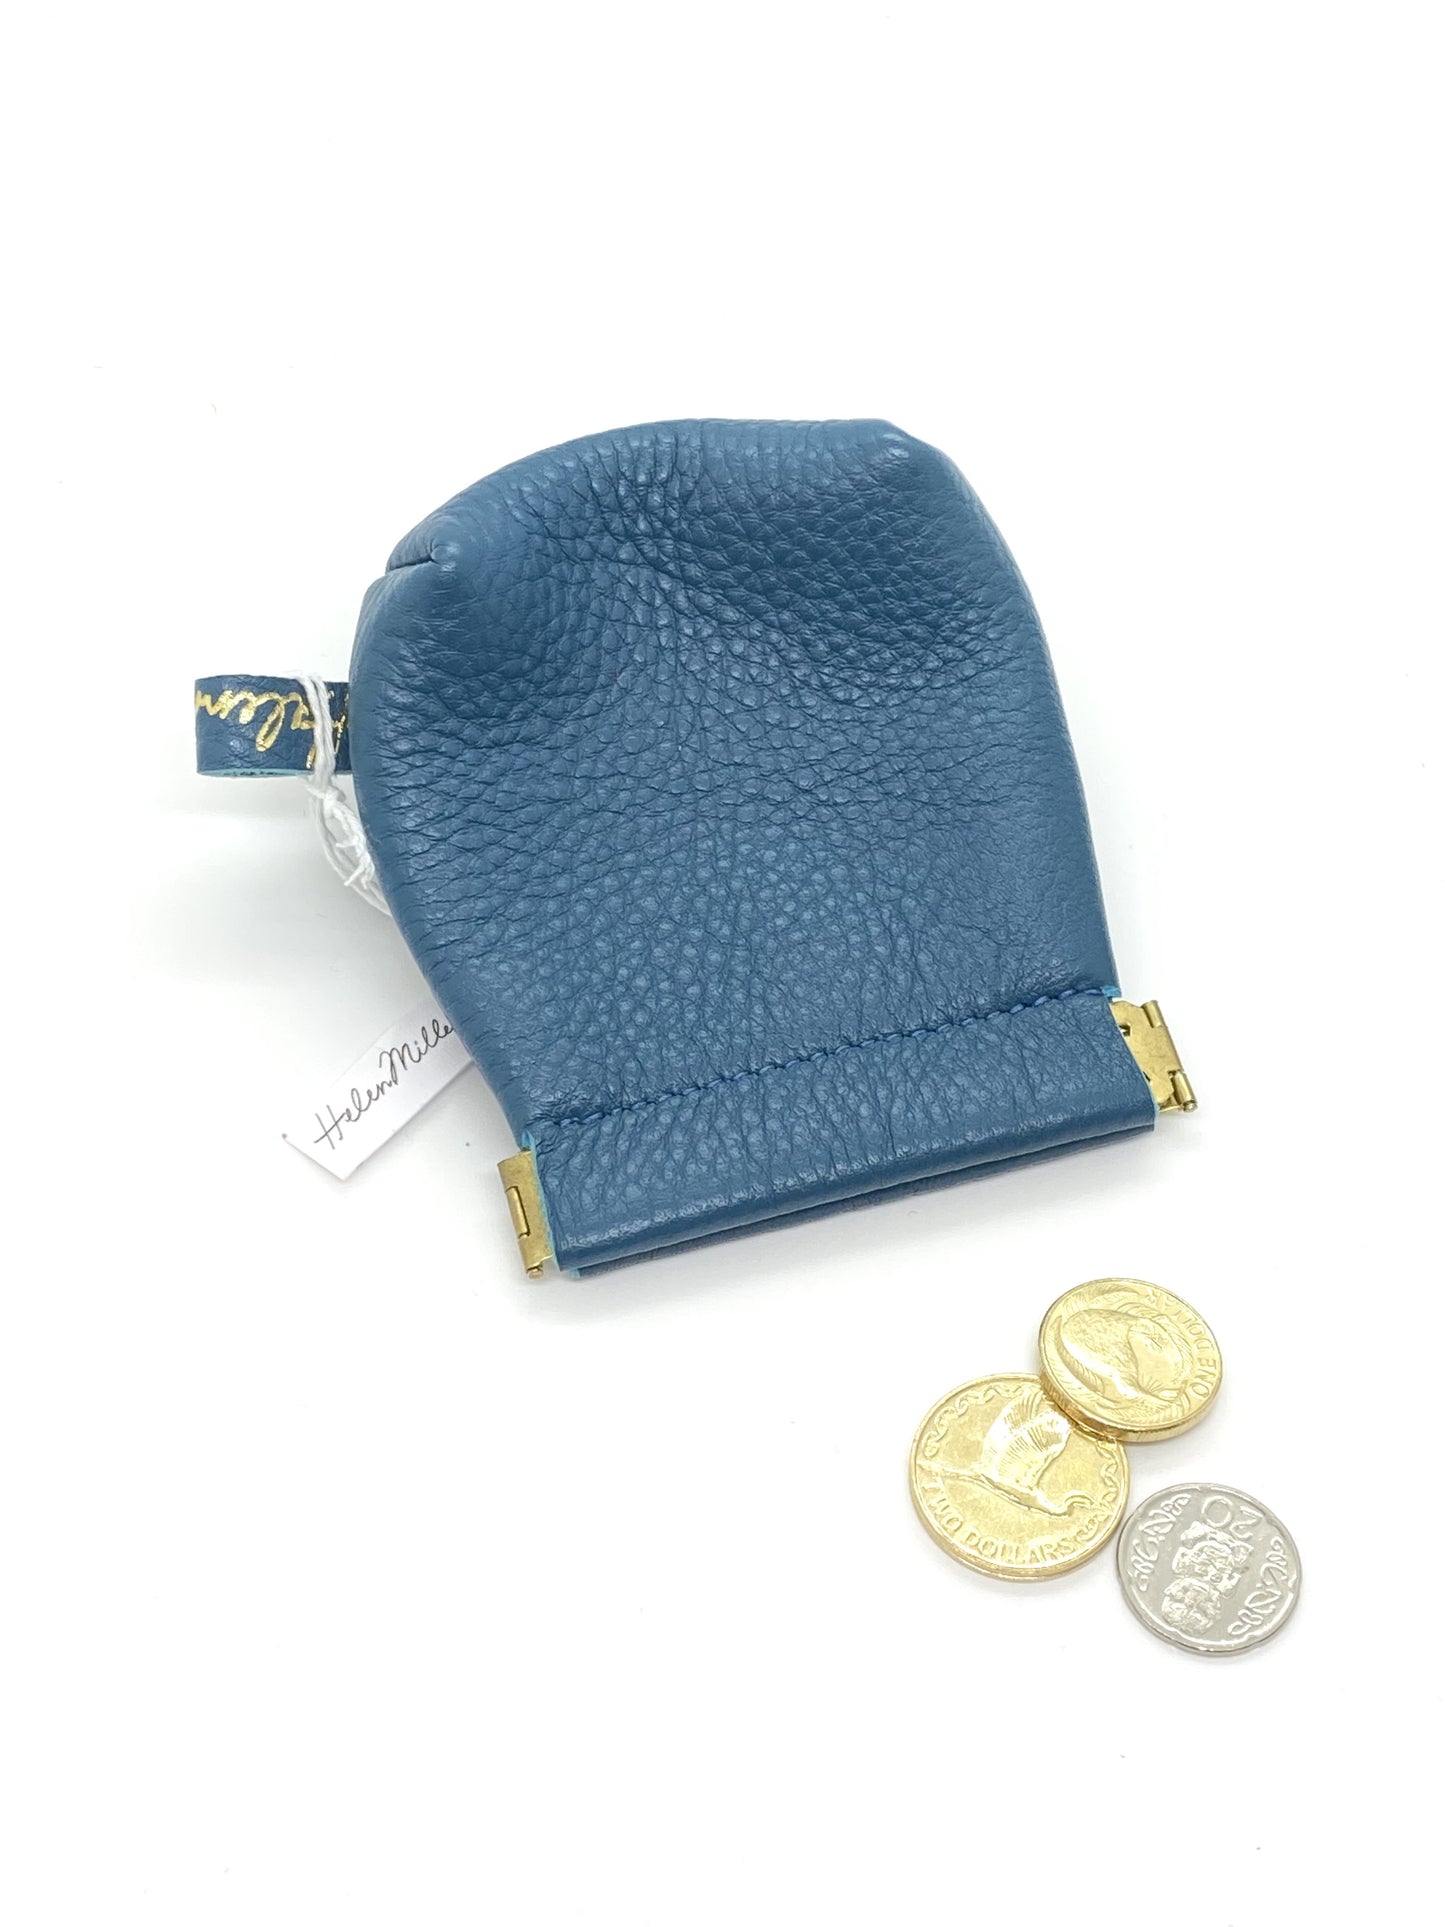 Magnetic Snap Pouch - MEGA - Teal